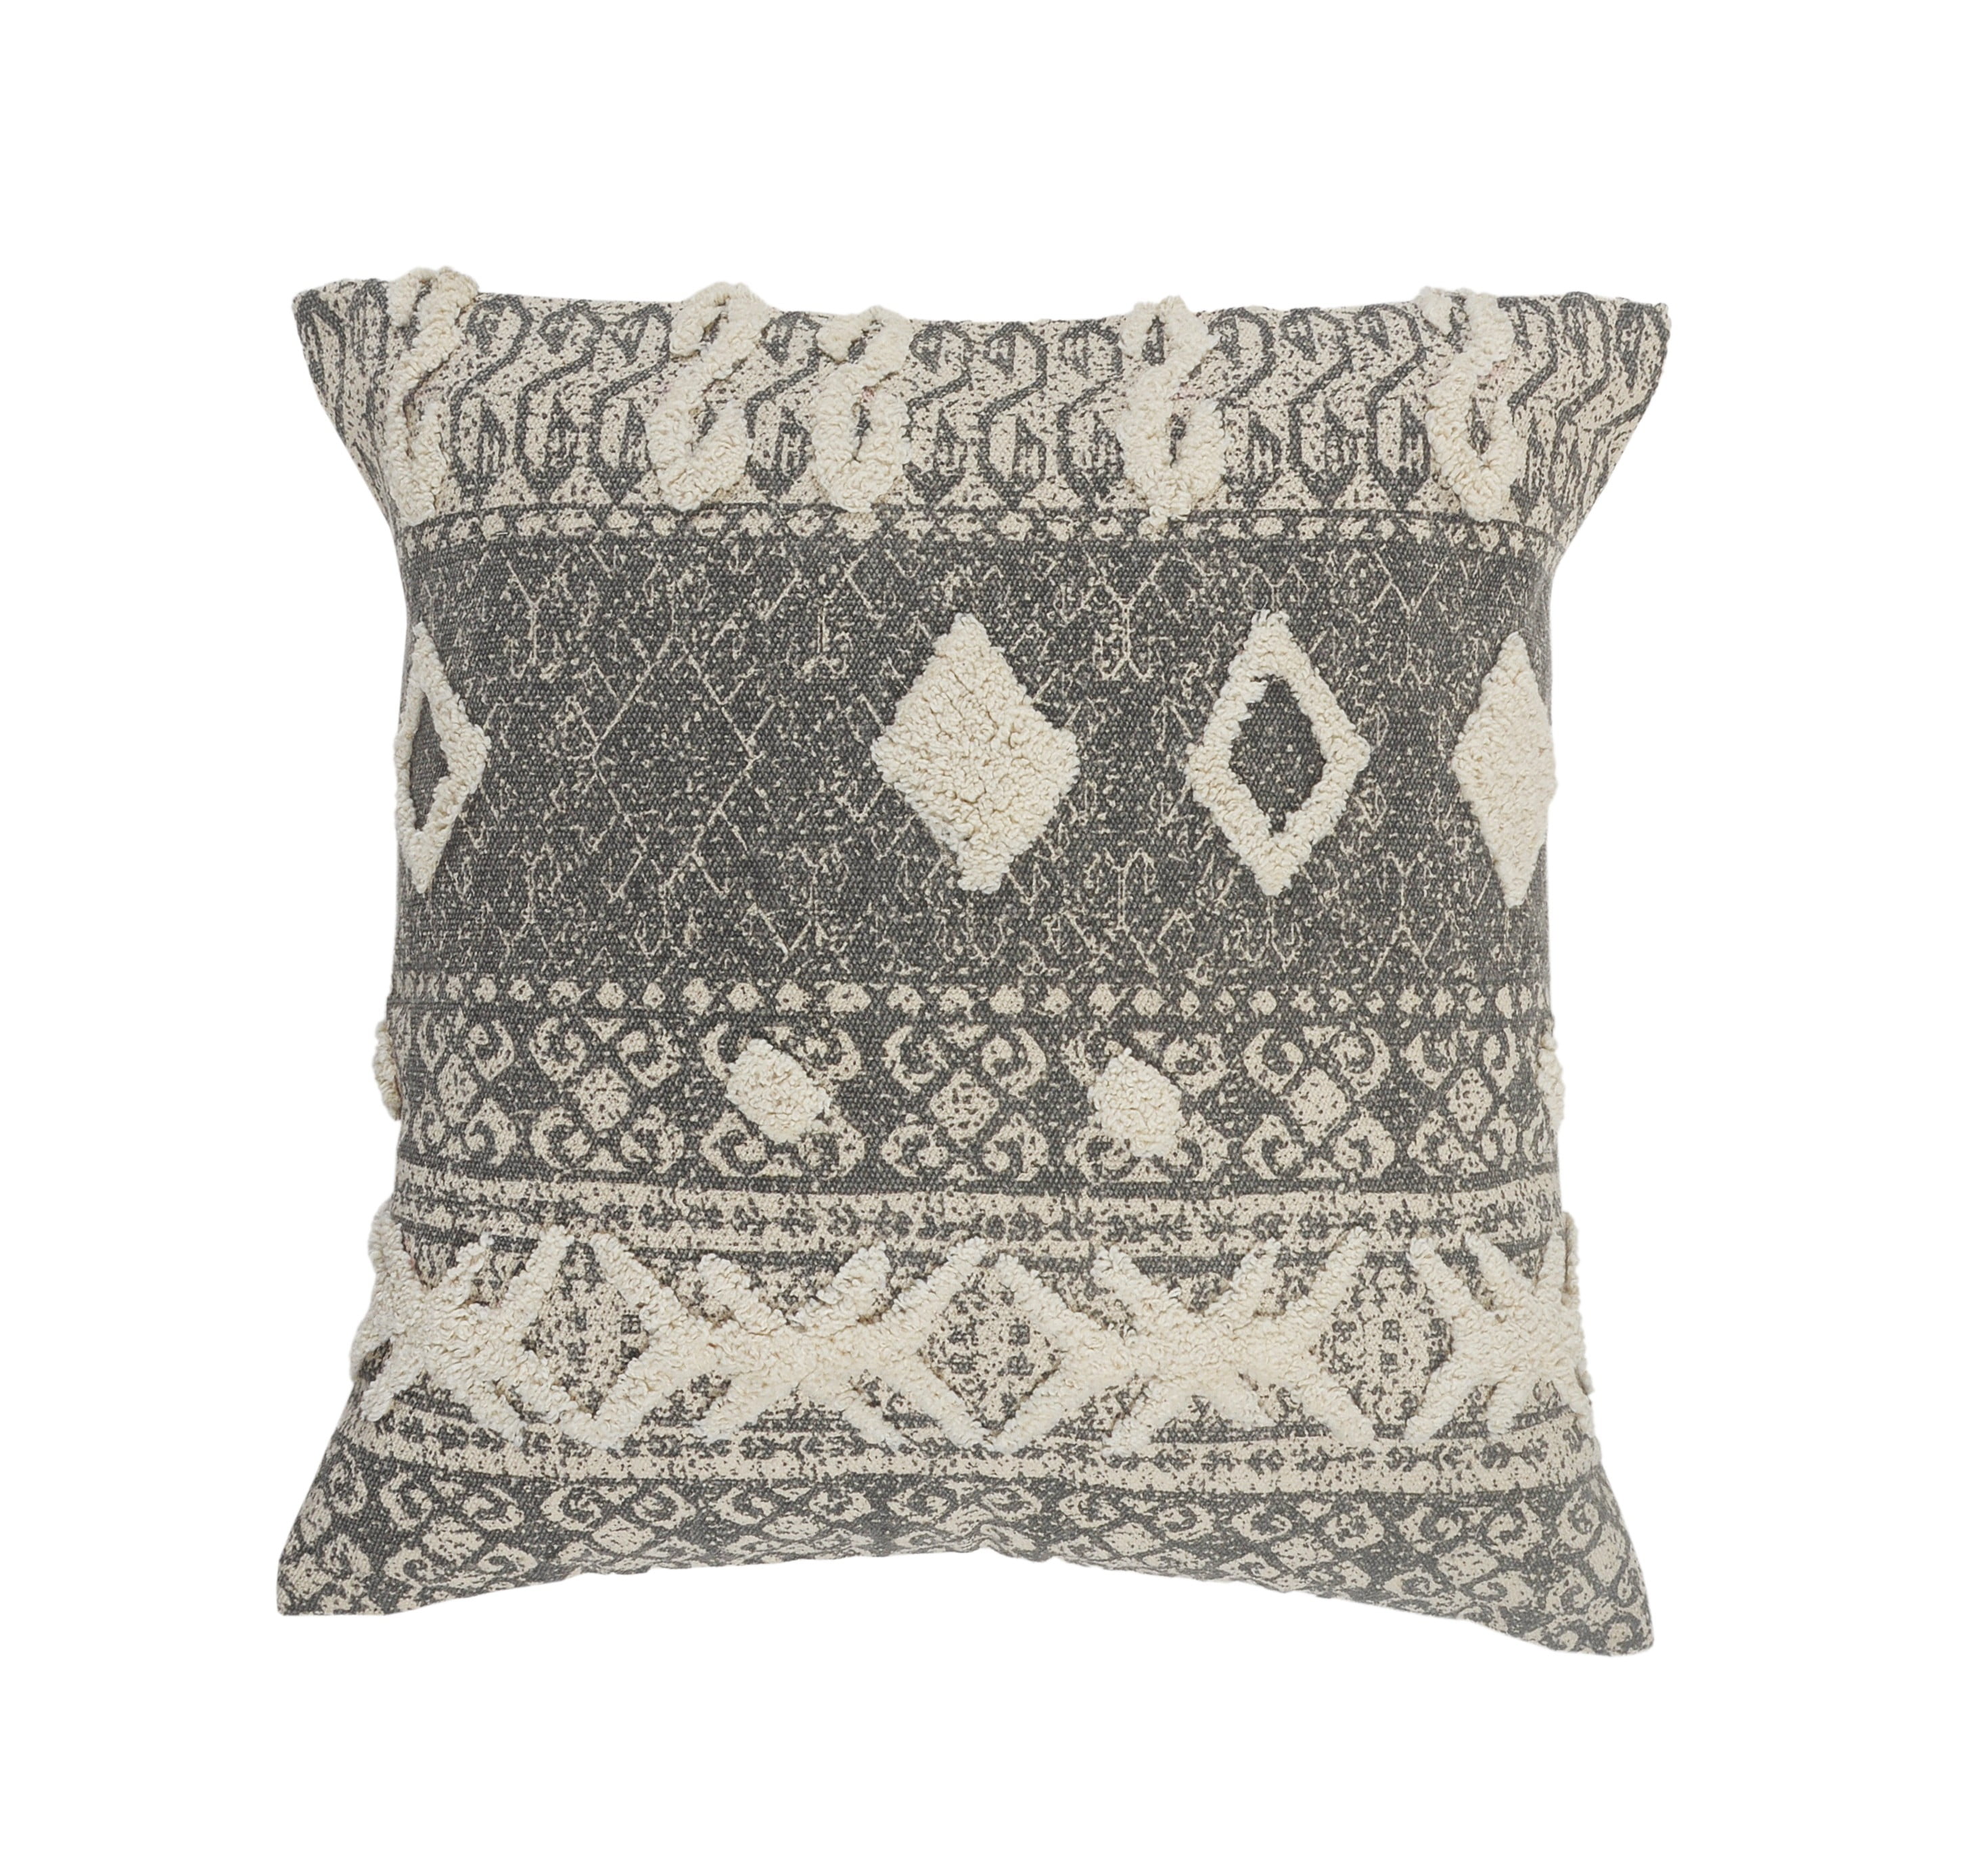 20 x 20 LR Home Gray Traditional Textured Geometric Throw Pillow